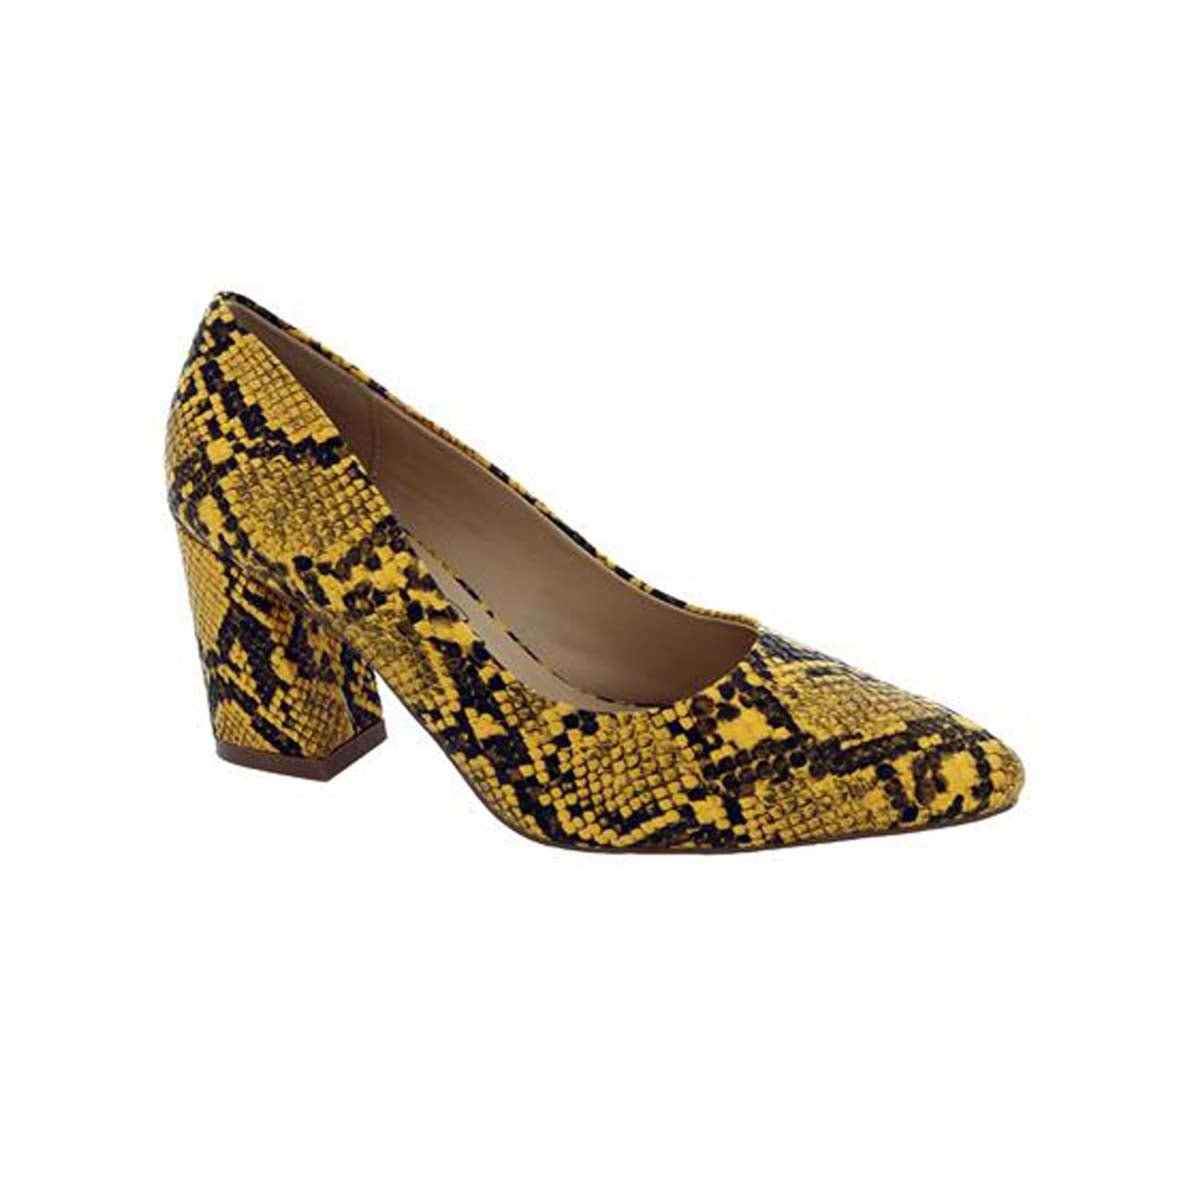 PENNY LOVES KENNY VENUS WOMEN PUMP SLIP-ON SHOES IN YELLOW FAUX SNAKE - TLW Shoes